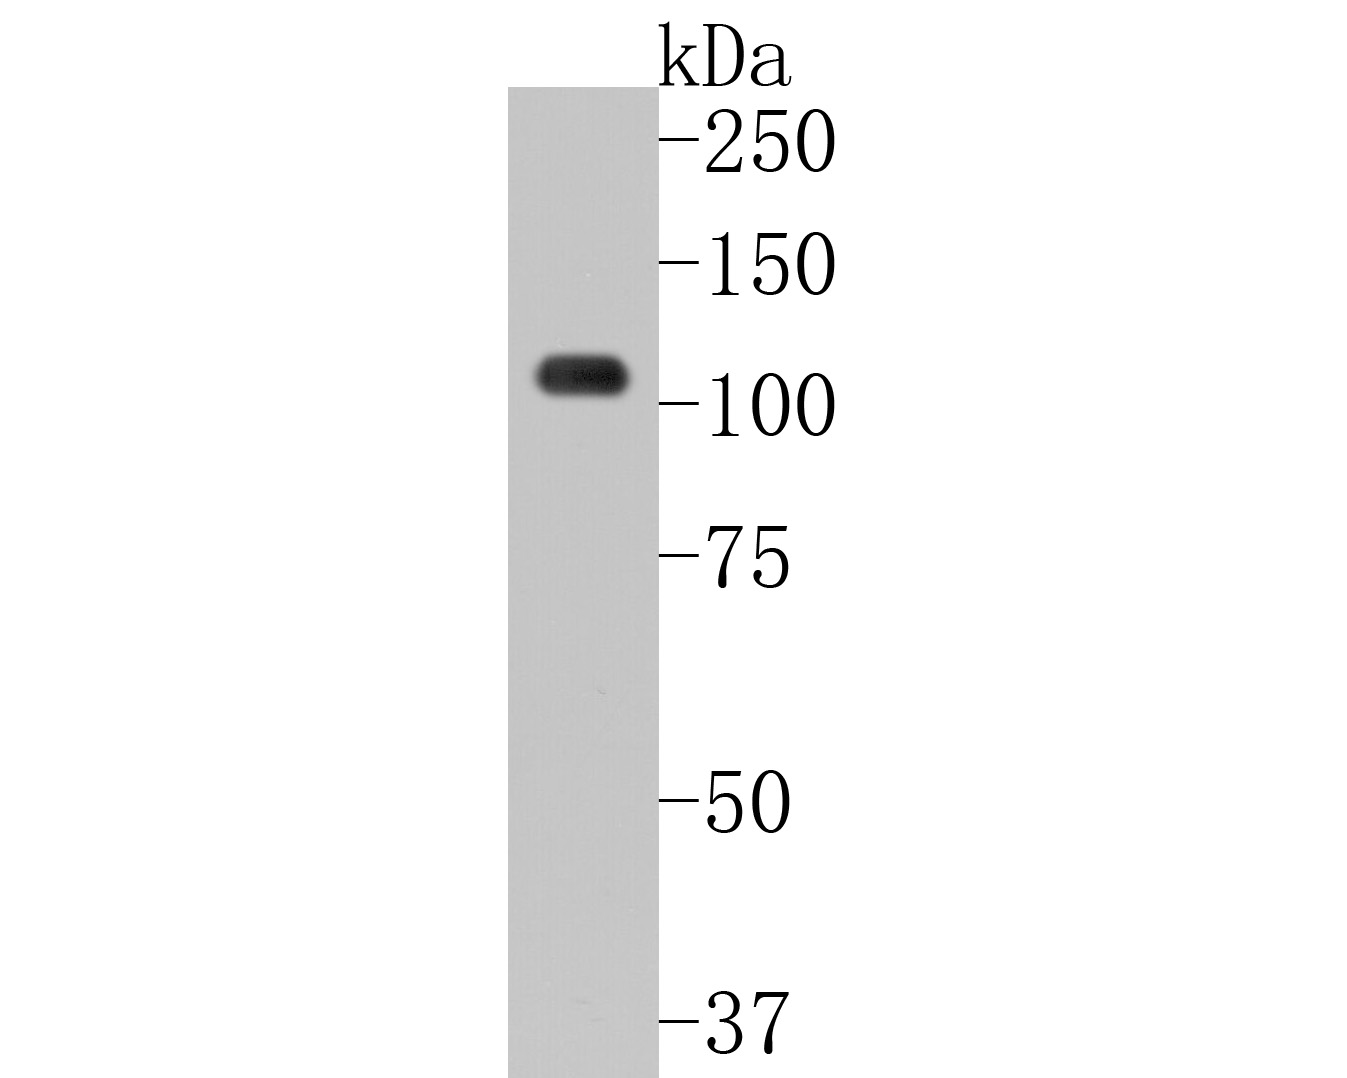 Western blot analysis of NFAT2 on K562 cell lysates. Proteins were transferred to a PVDF membrane and blocked with 5% BSA in PBS for 1 hour at room temperature. The primary antibody (ET1704-45, 1/500) was used in 5% BSA at room temperature for 2 hours. Goat Anti-Rabbit IgG - HRP Secondary Antibody (HA1001) at 1:5,000 dilution was used for 1 hour at room temperature.